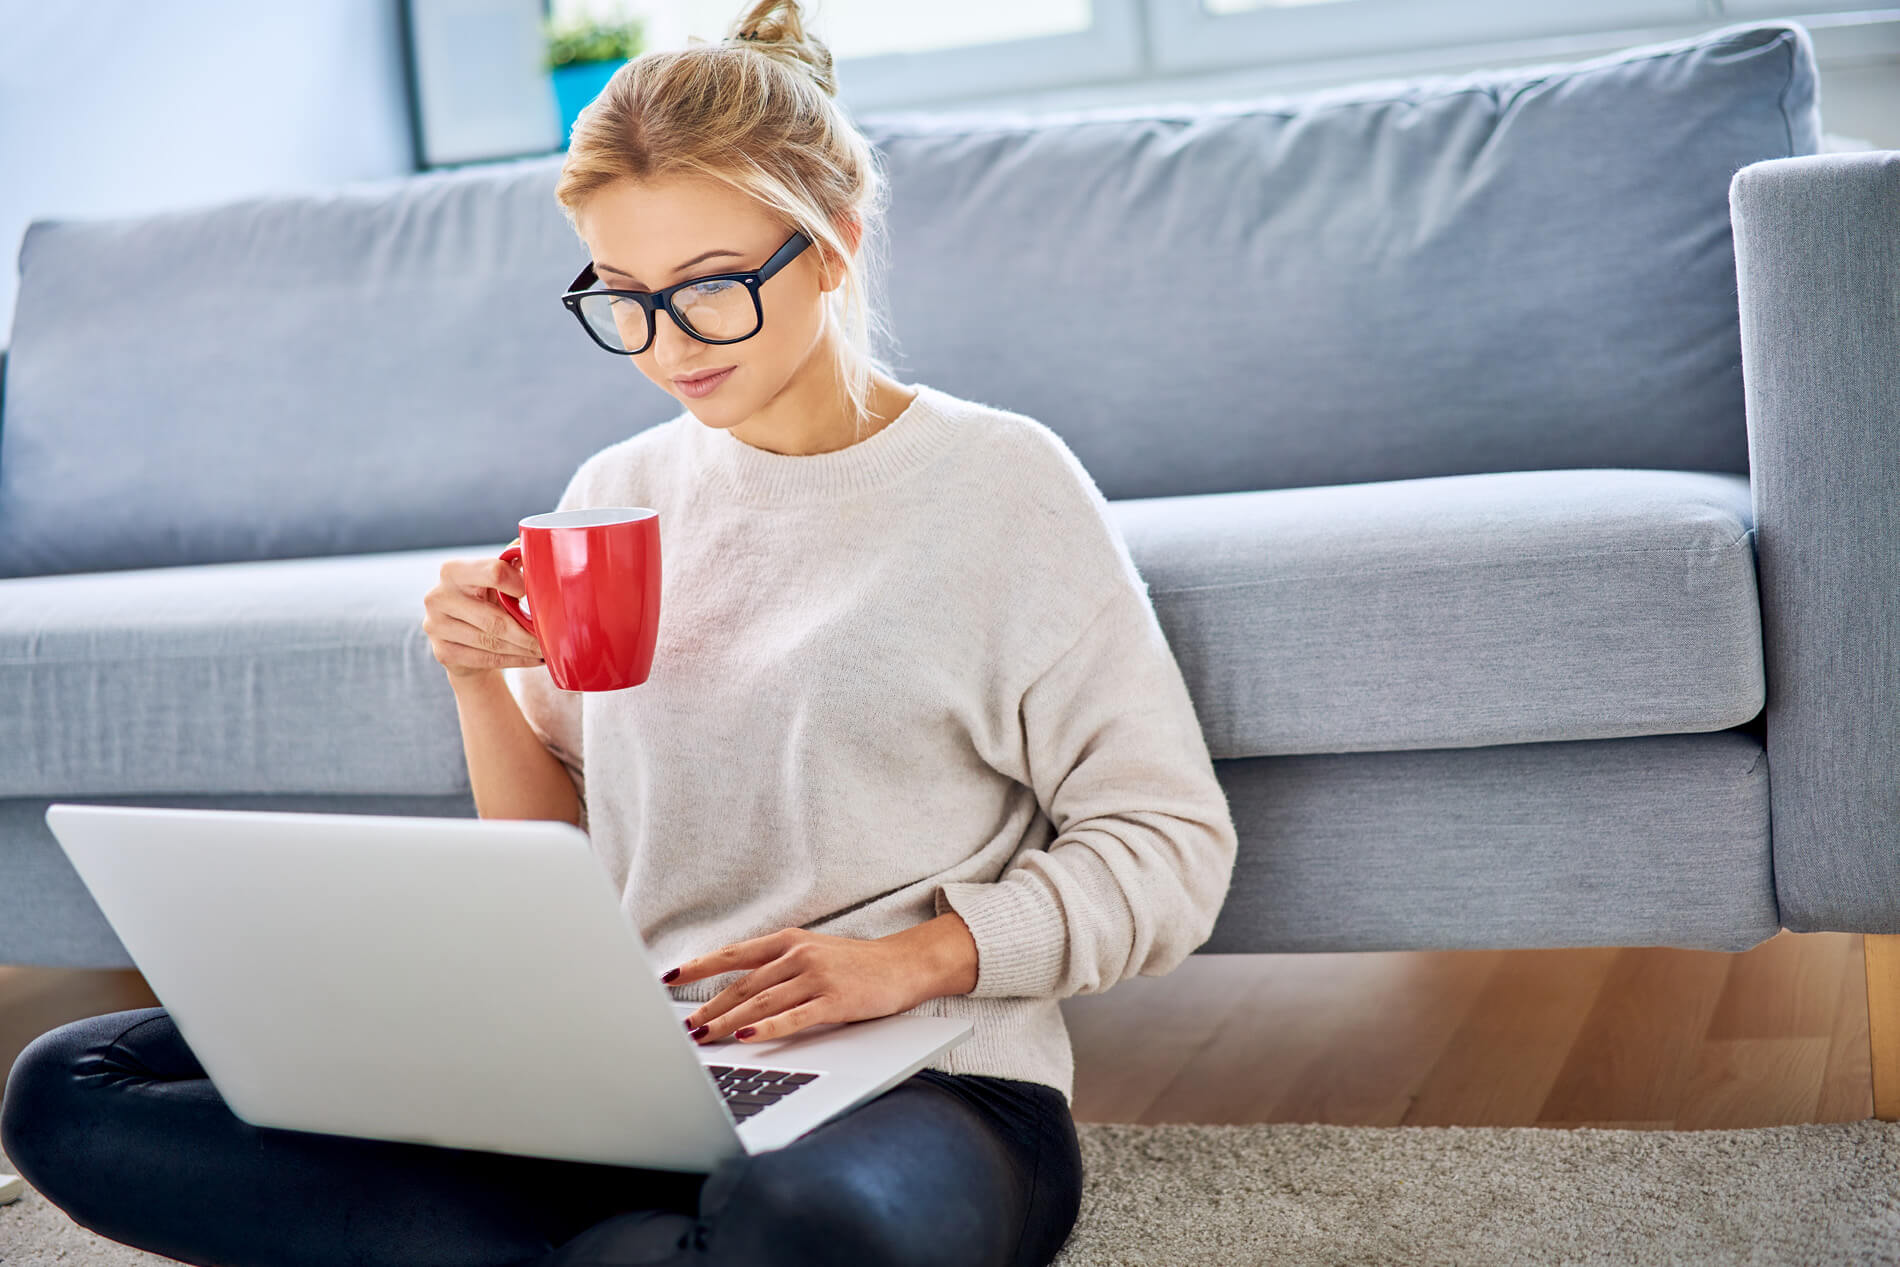 Woman drinking coffee looking at a laptop